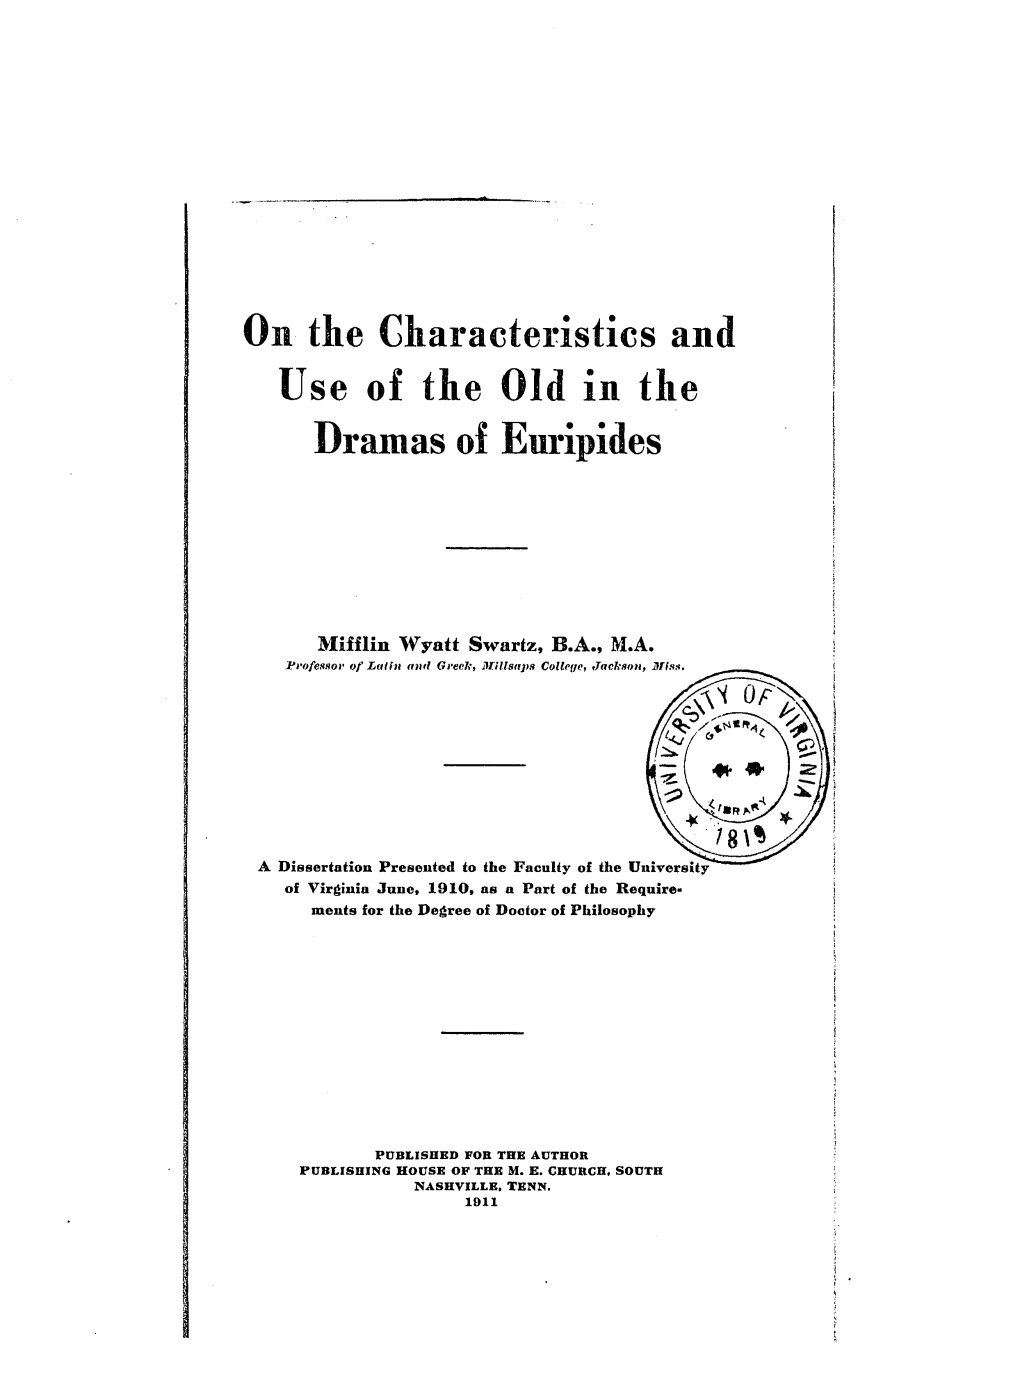 Use of the Old in the Dramas of Euripides